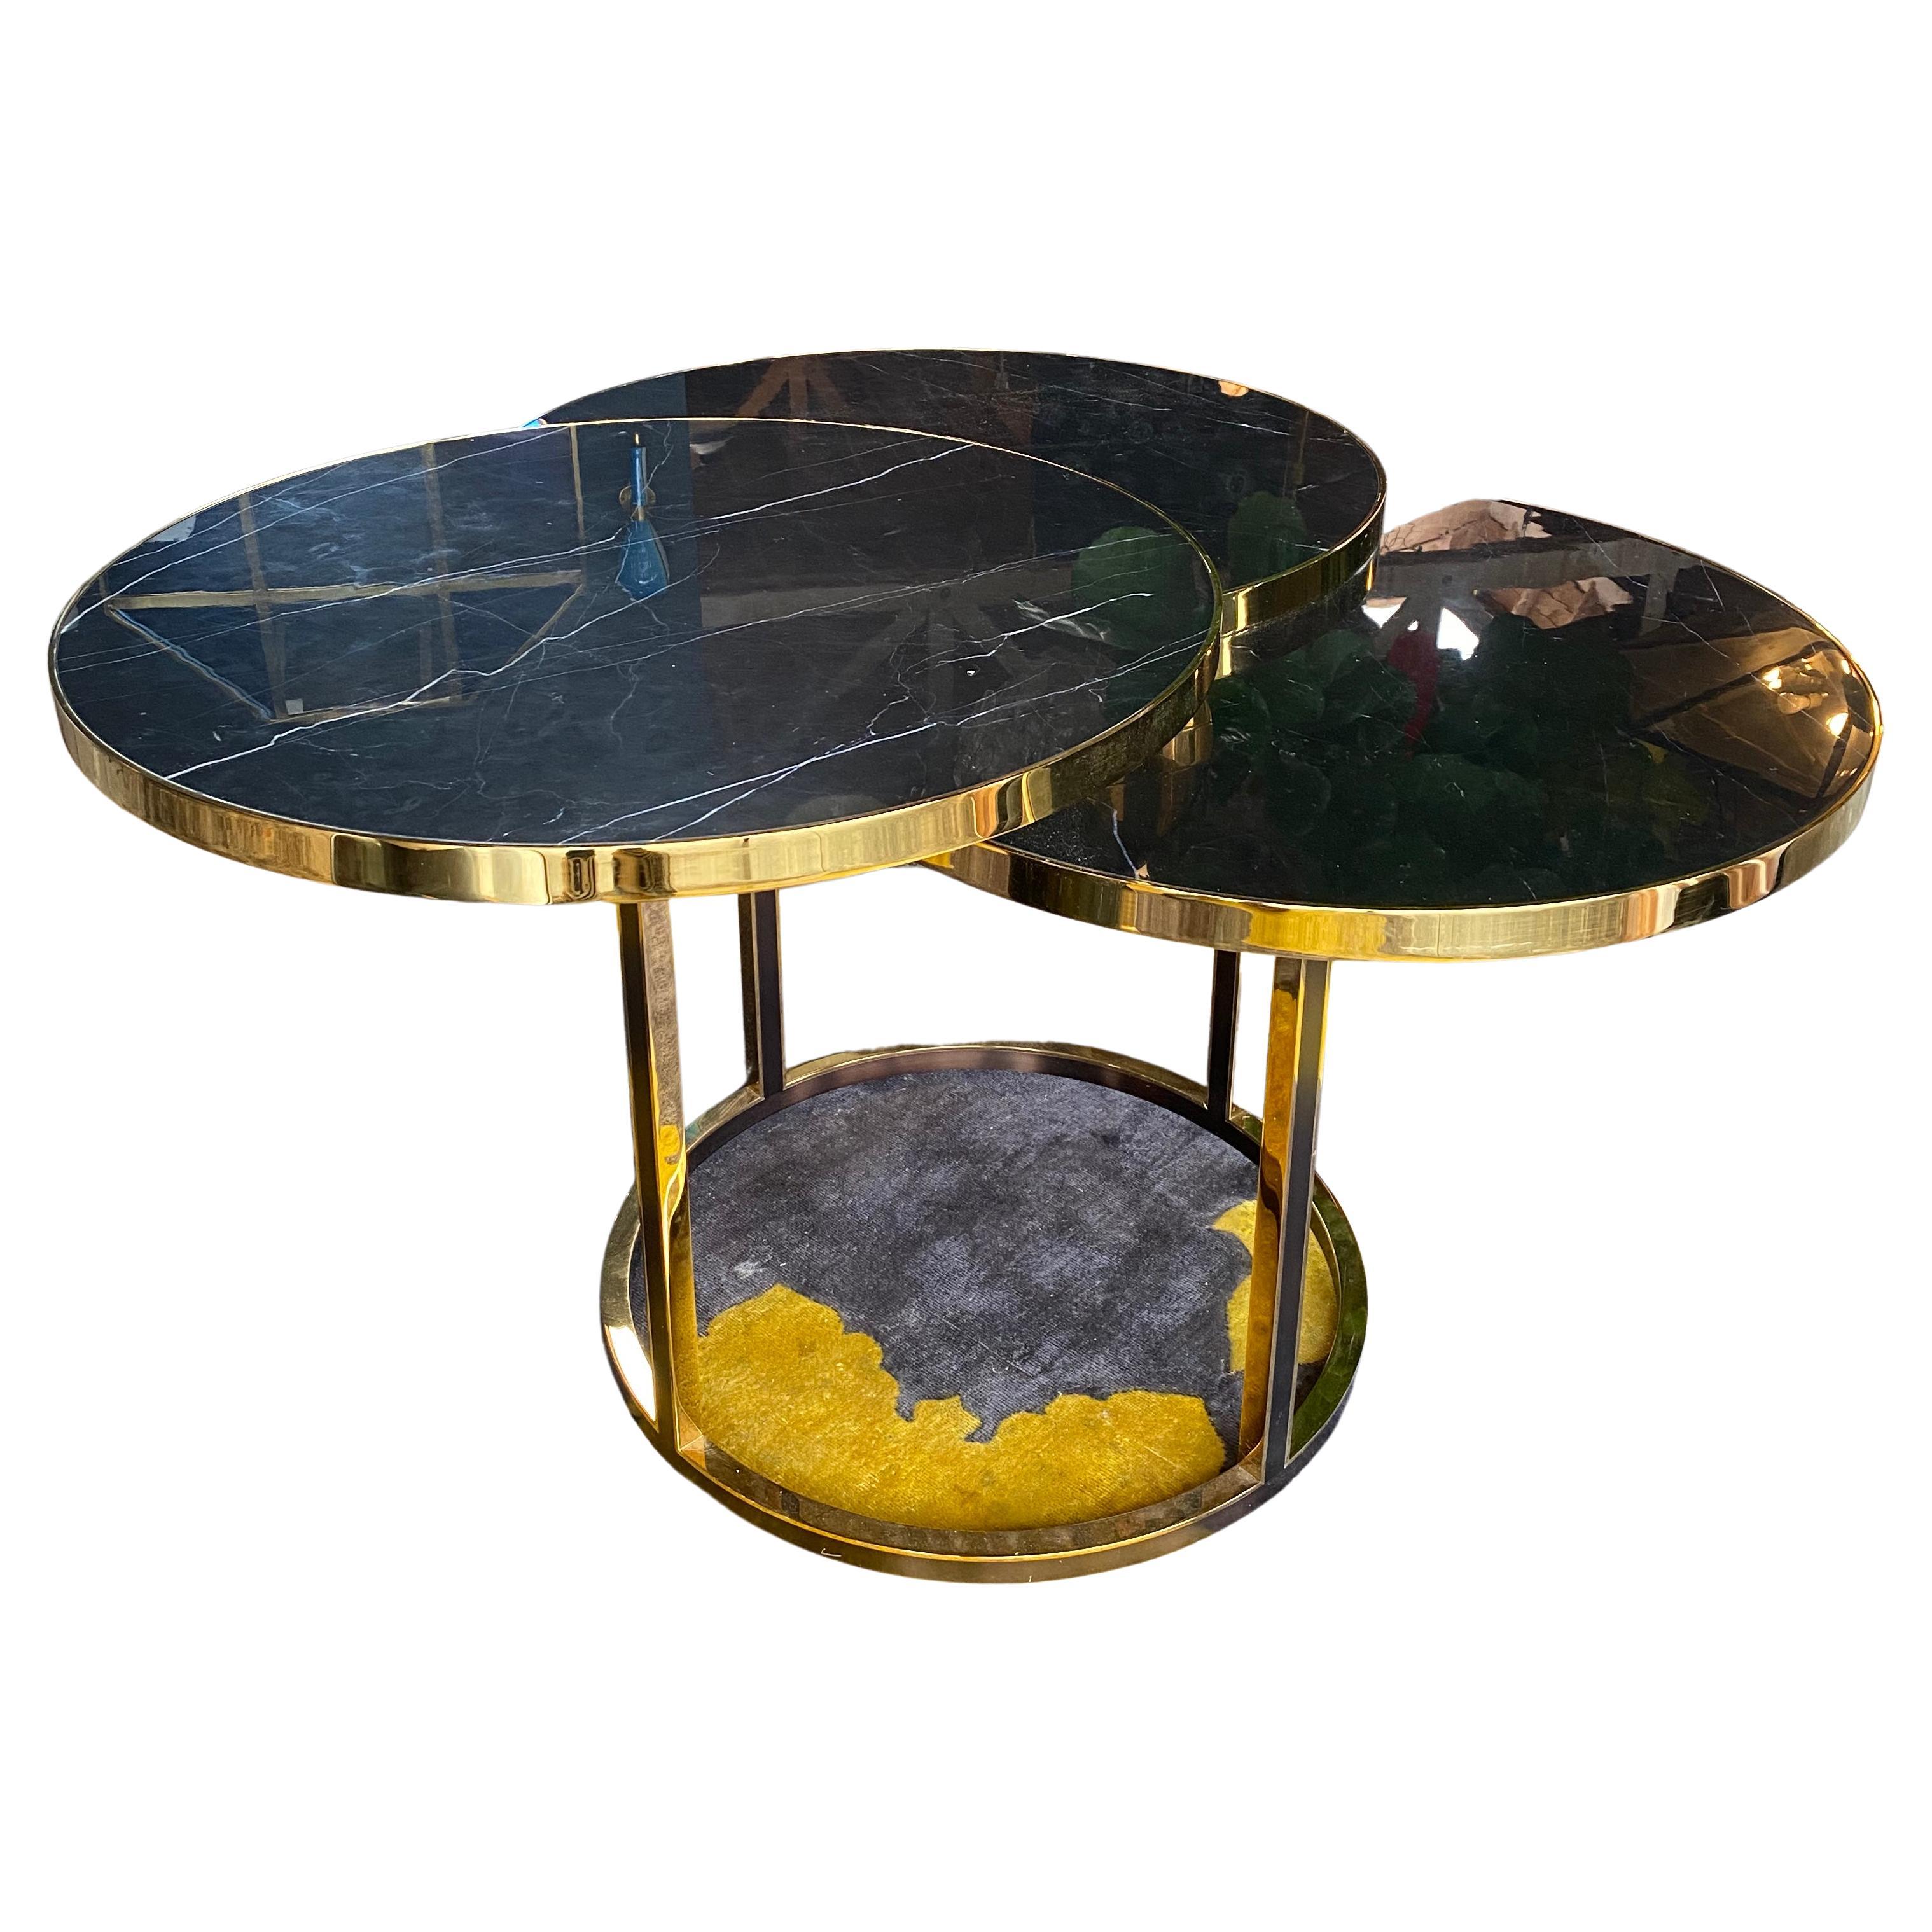 Italian Vintage Marble and Brass Table, 1980s by Alexander McQueen For Sale